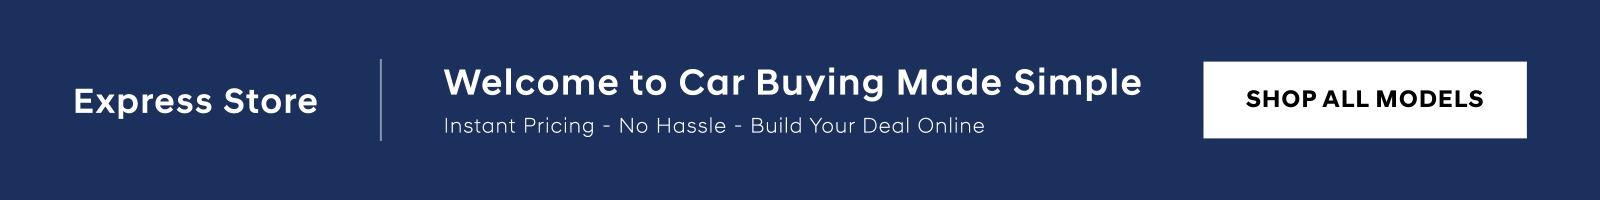 Express Store Welcome to Car Buying Made Simple Instant Pricing - No Hassle - Build Your Deal Online